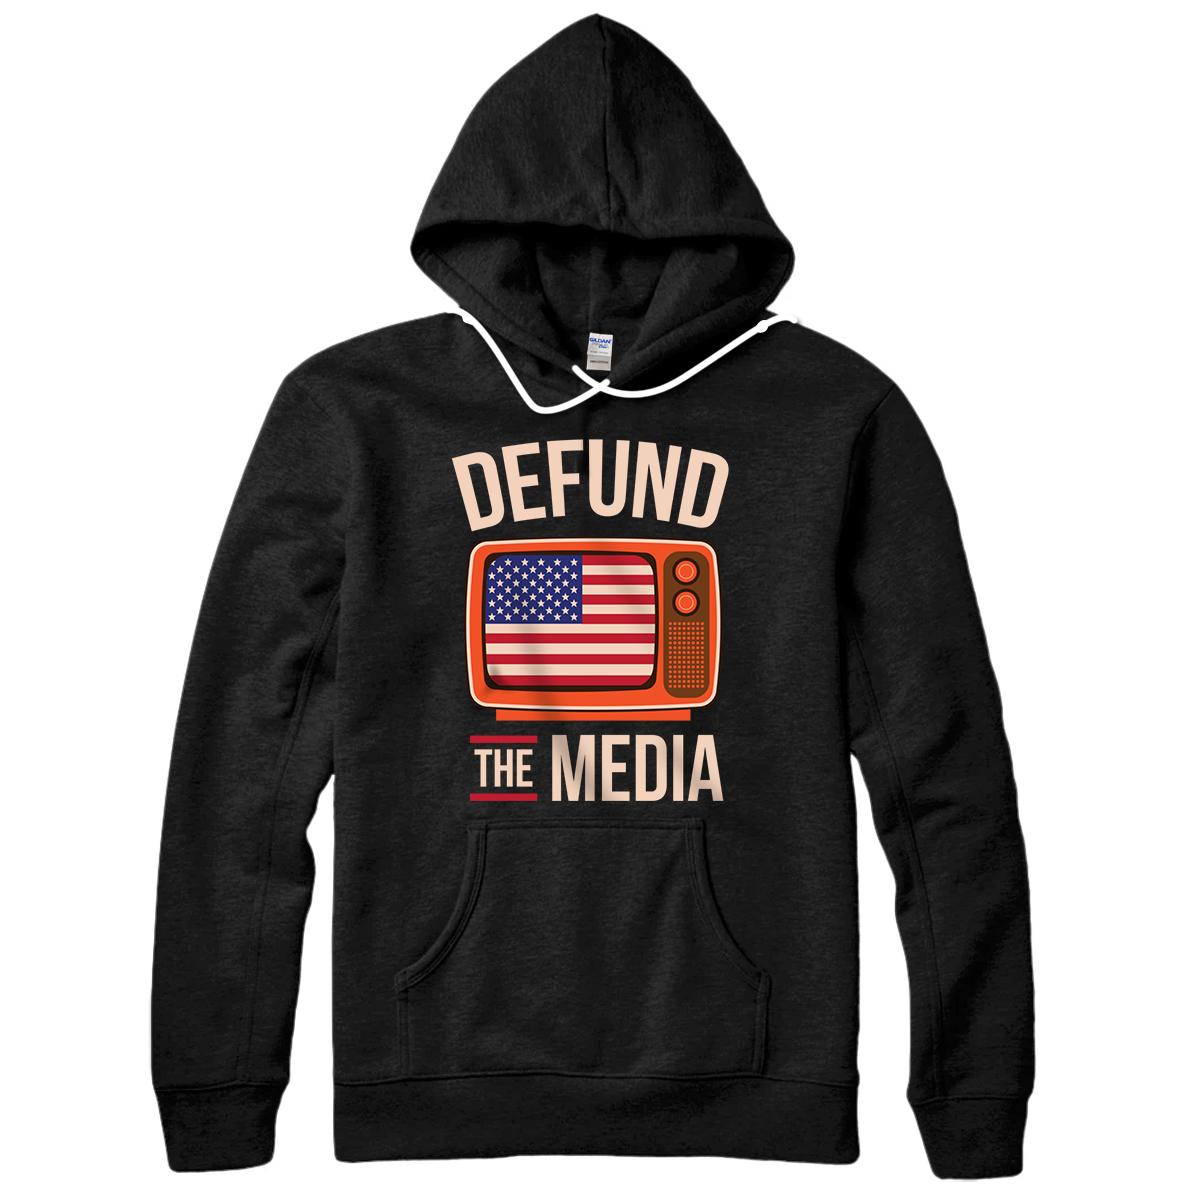 Personalized Defund The Media No To Fake News Protest Activist Pullover Hoodie